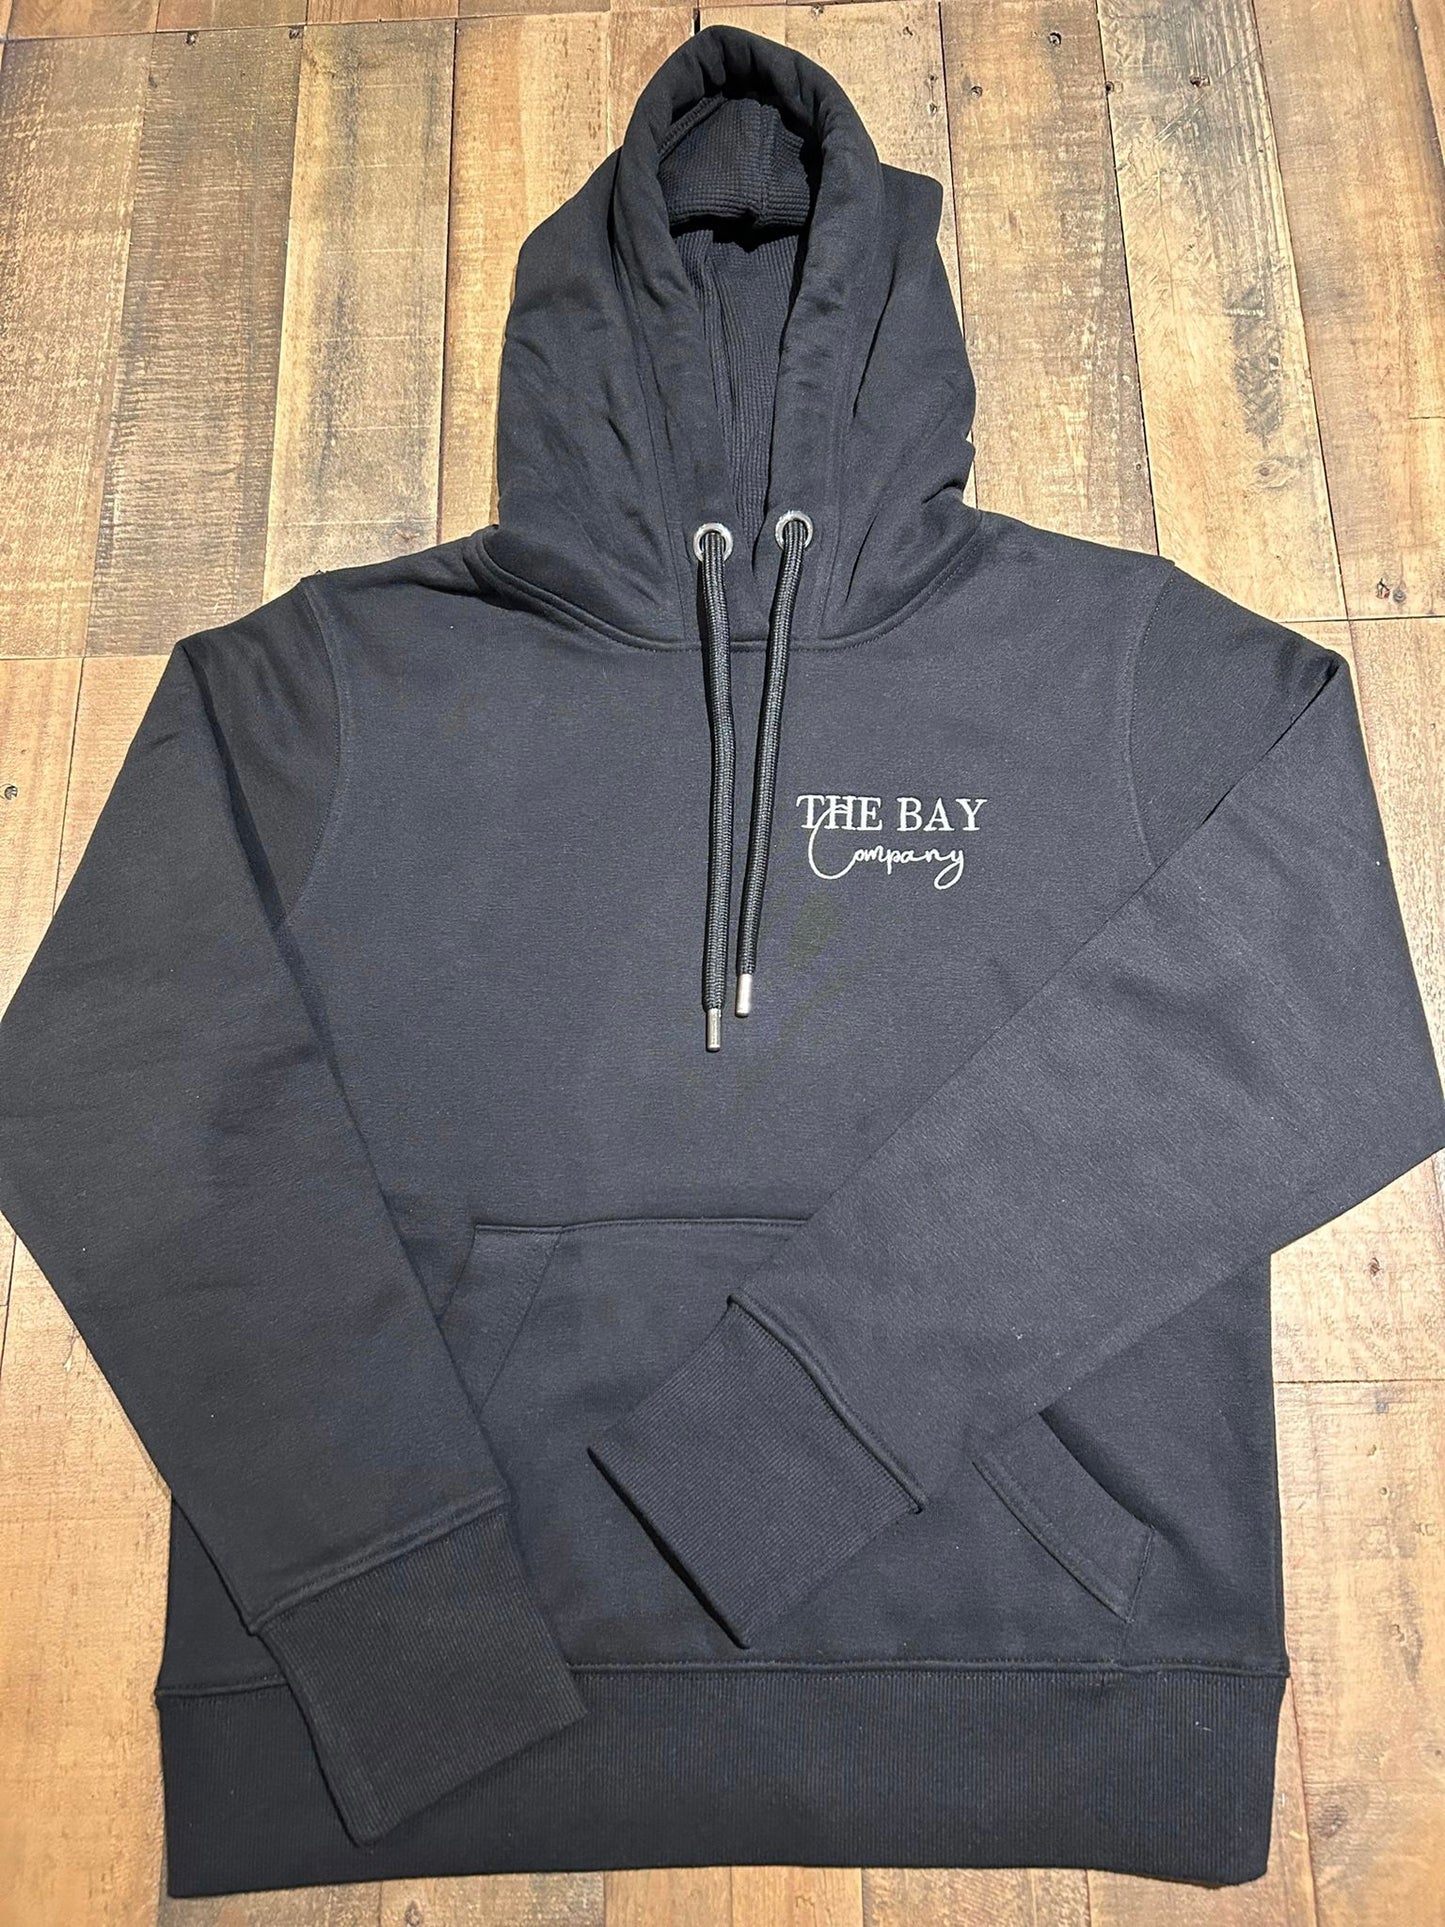 The black “follow your dreams” women’s hoodie from the bay company